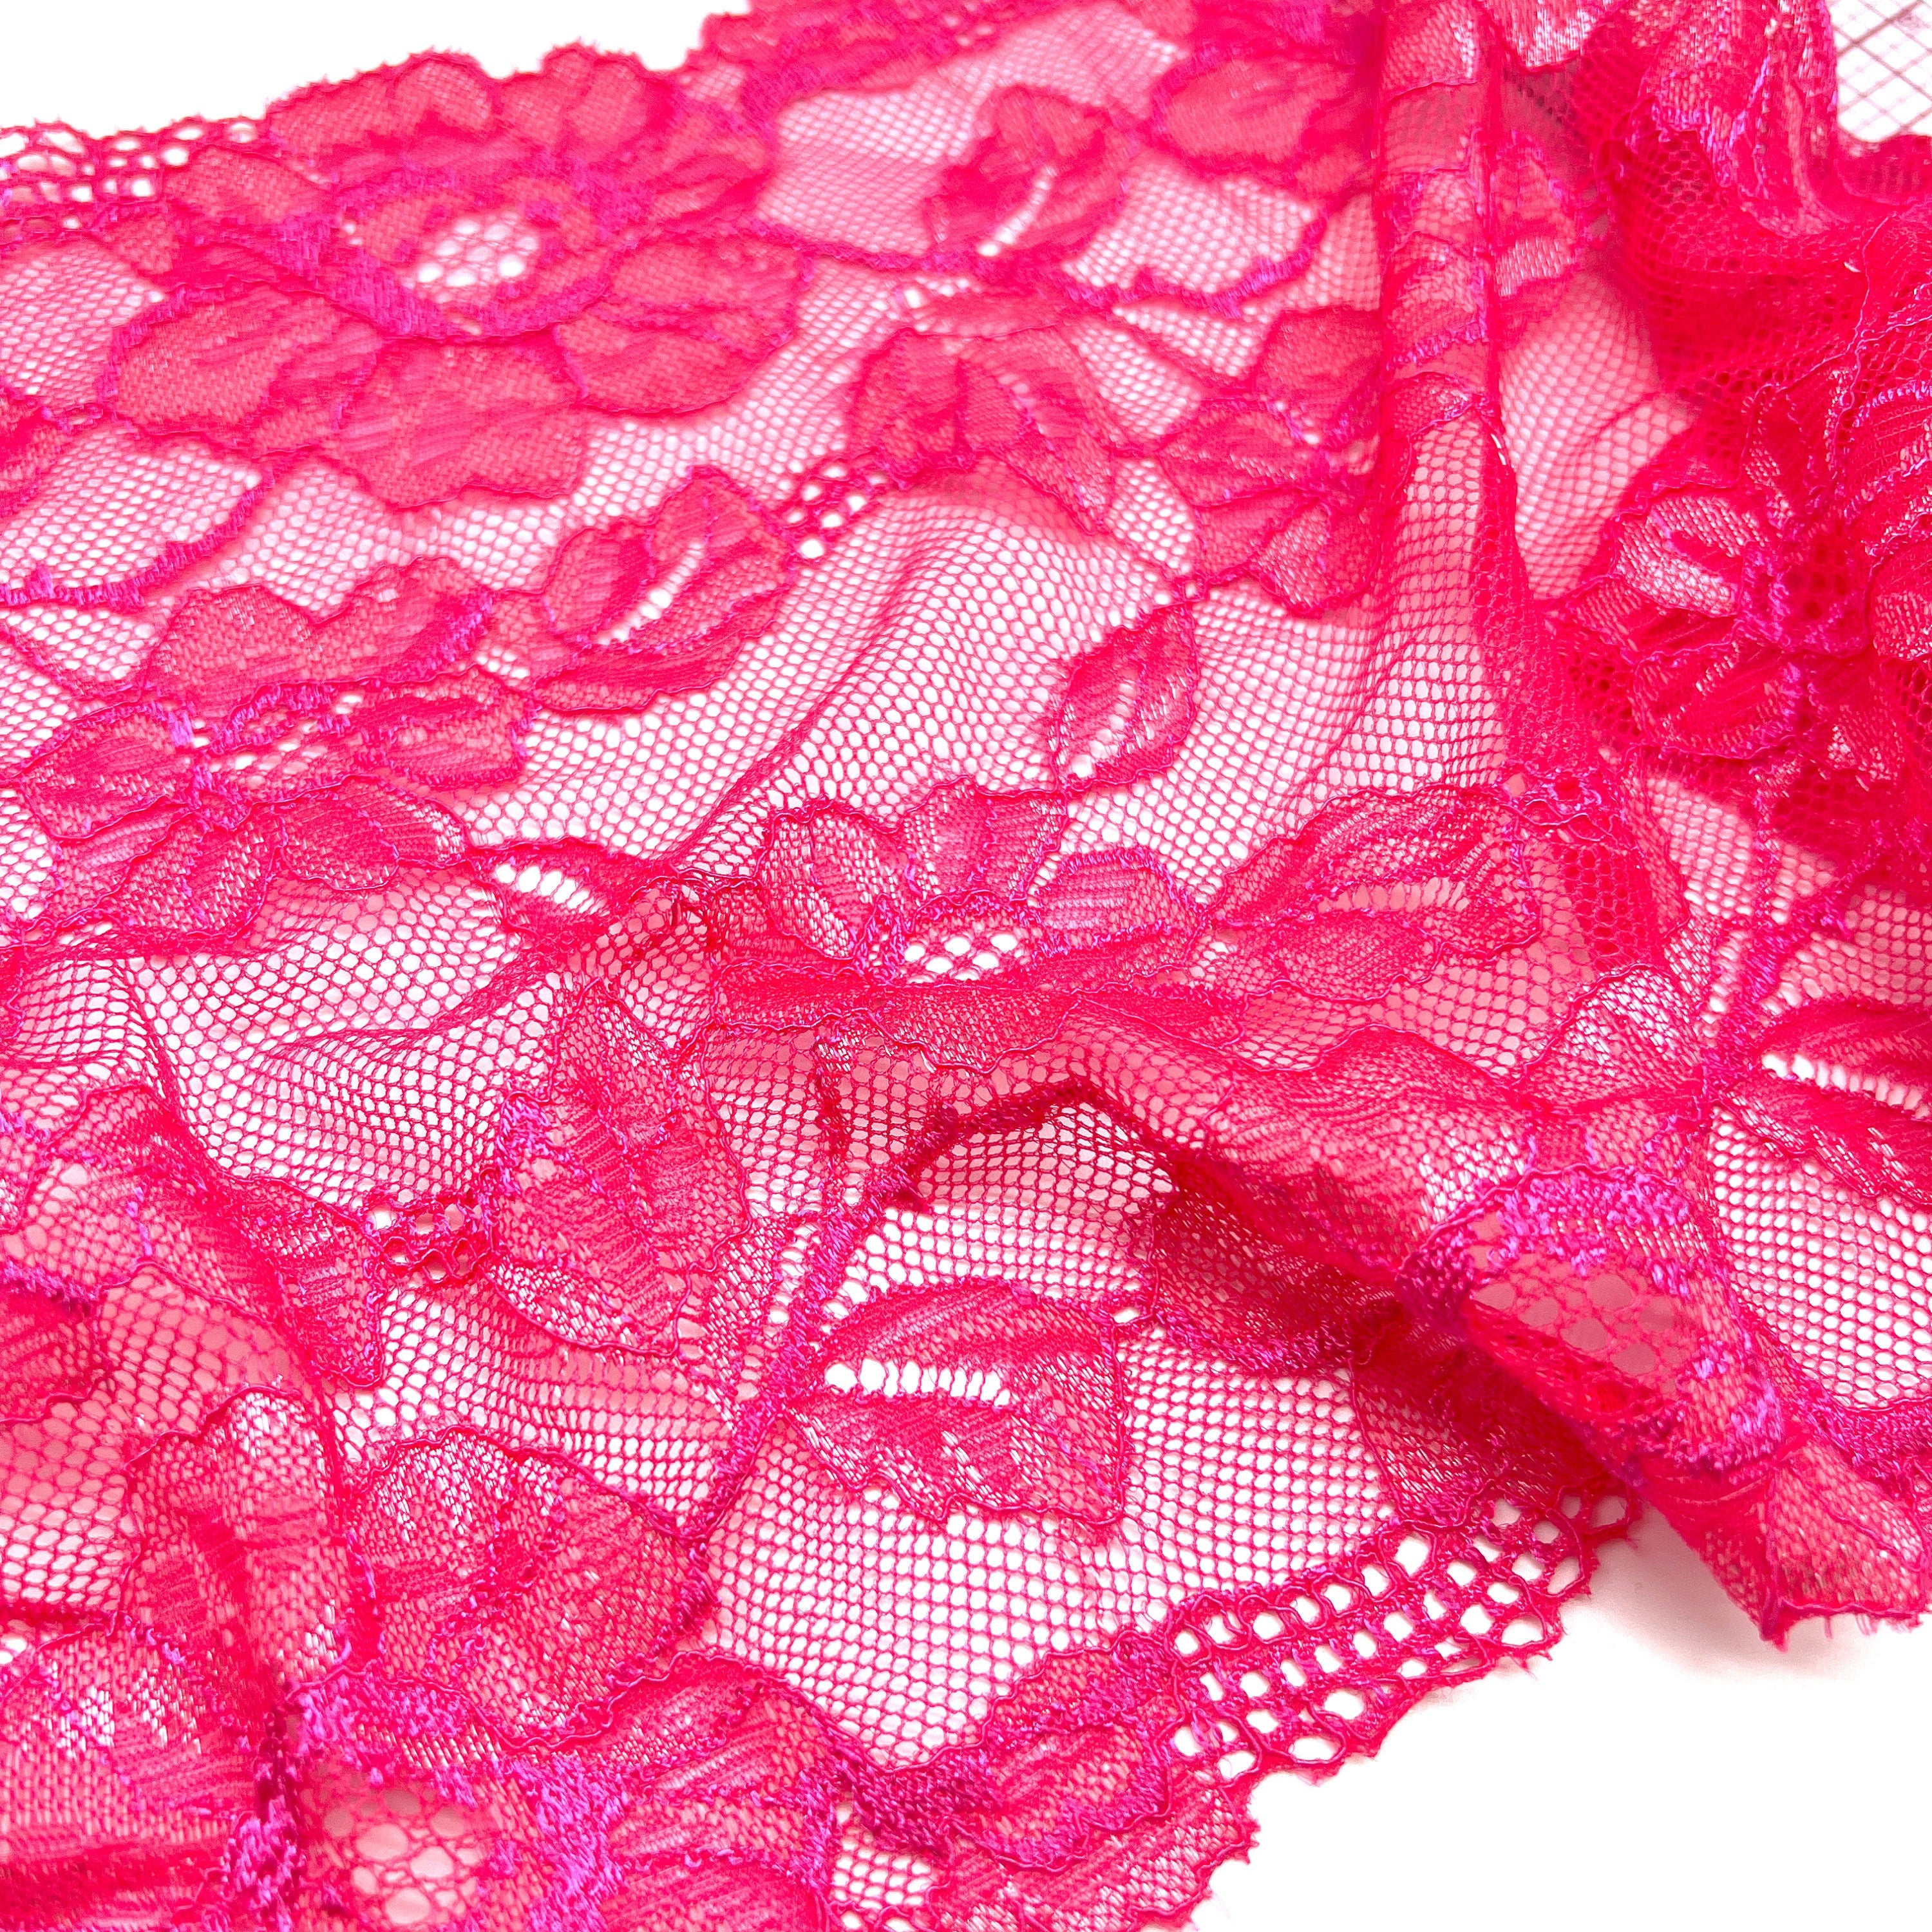 9" (23cm) Stretch Lace, Soft, High Quality in Beige, Pink, Turquoise and Gray- by the 1 yard - Stitch Love Studio